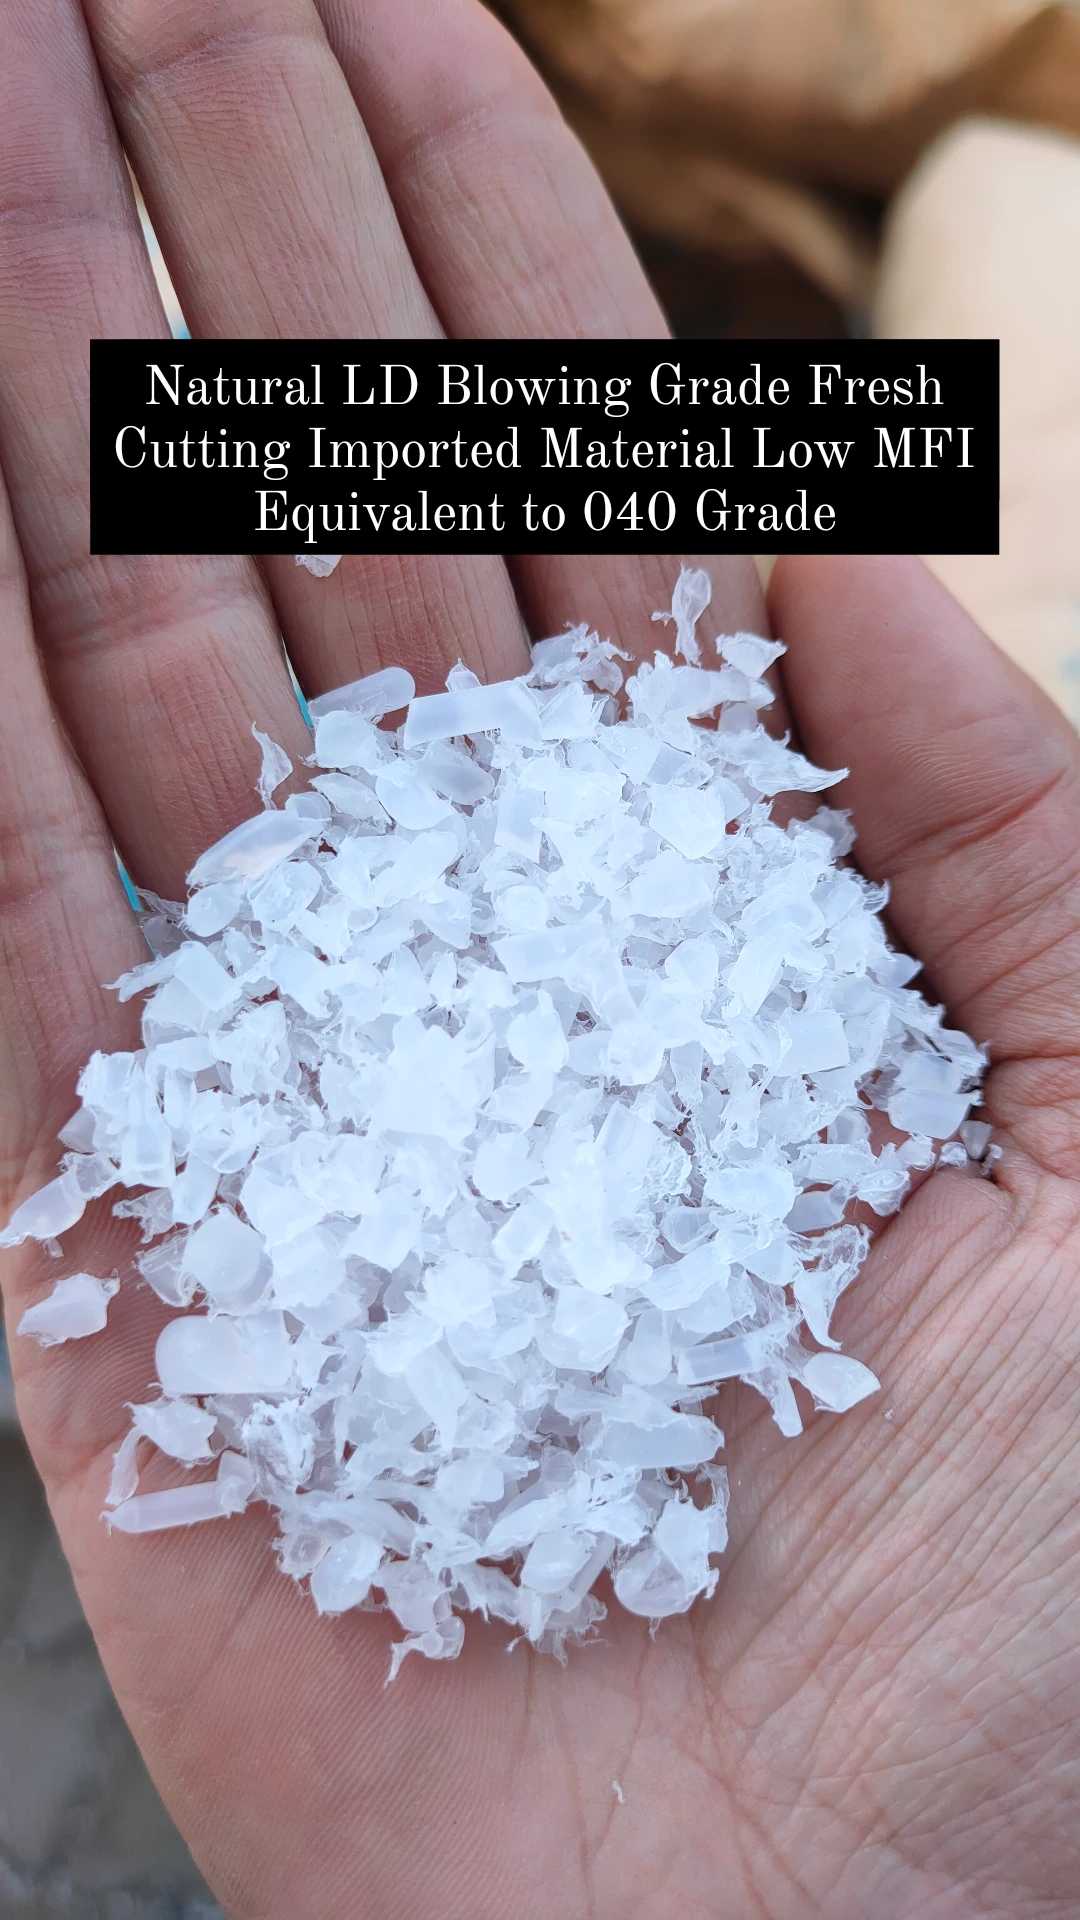 NATURAL LD BLOWING GRADE LDPE Grinding Blow mxmxq  india Plastic4trade